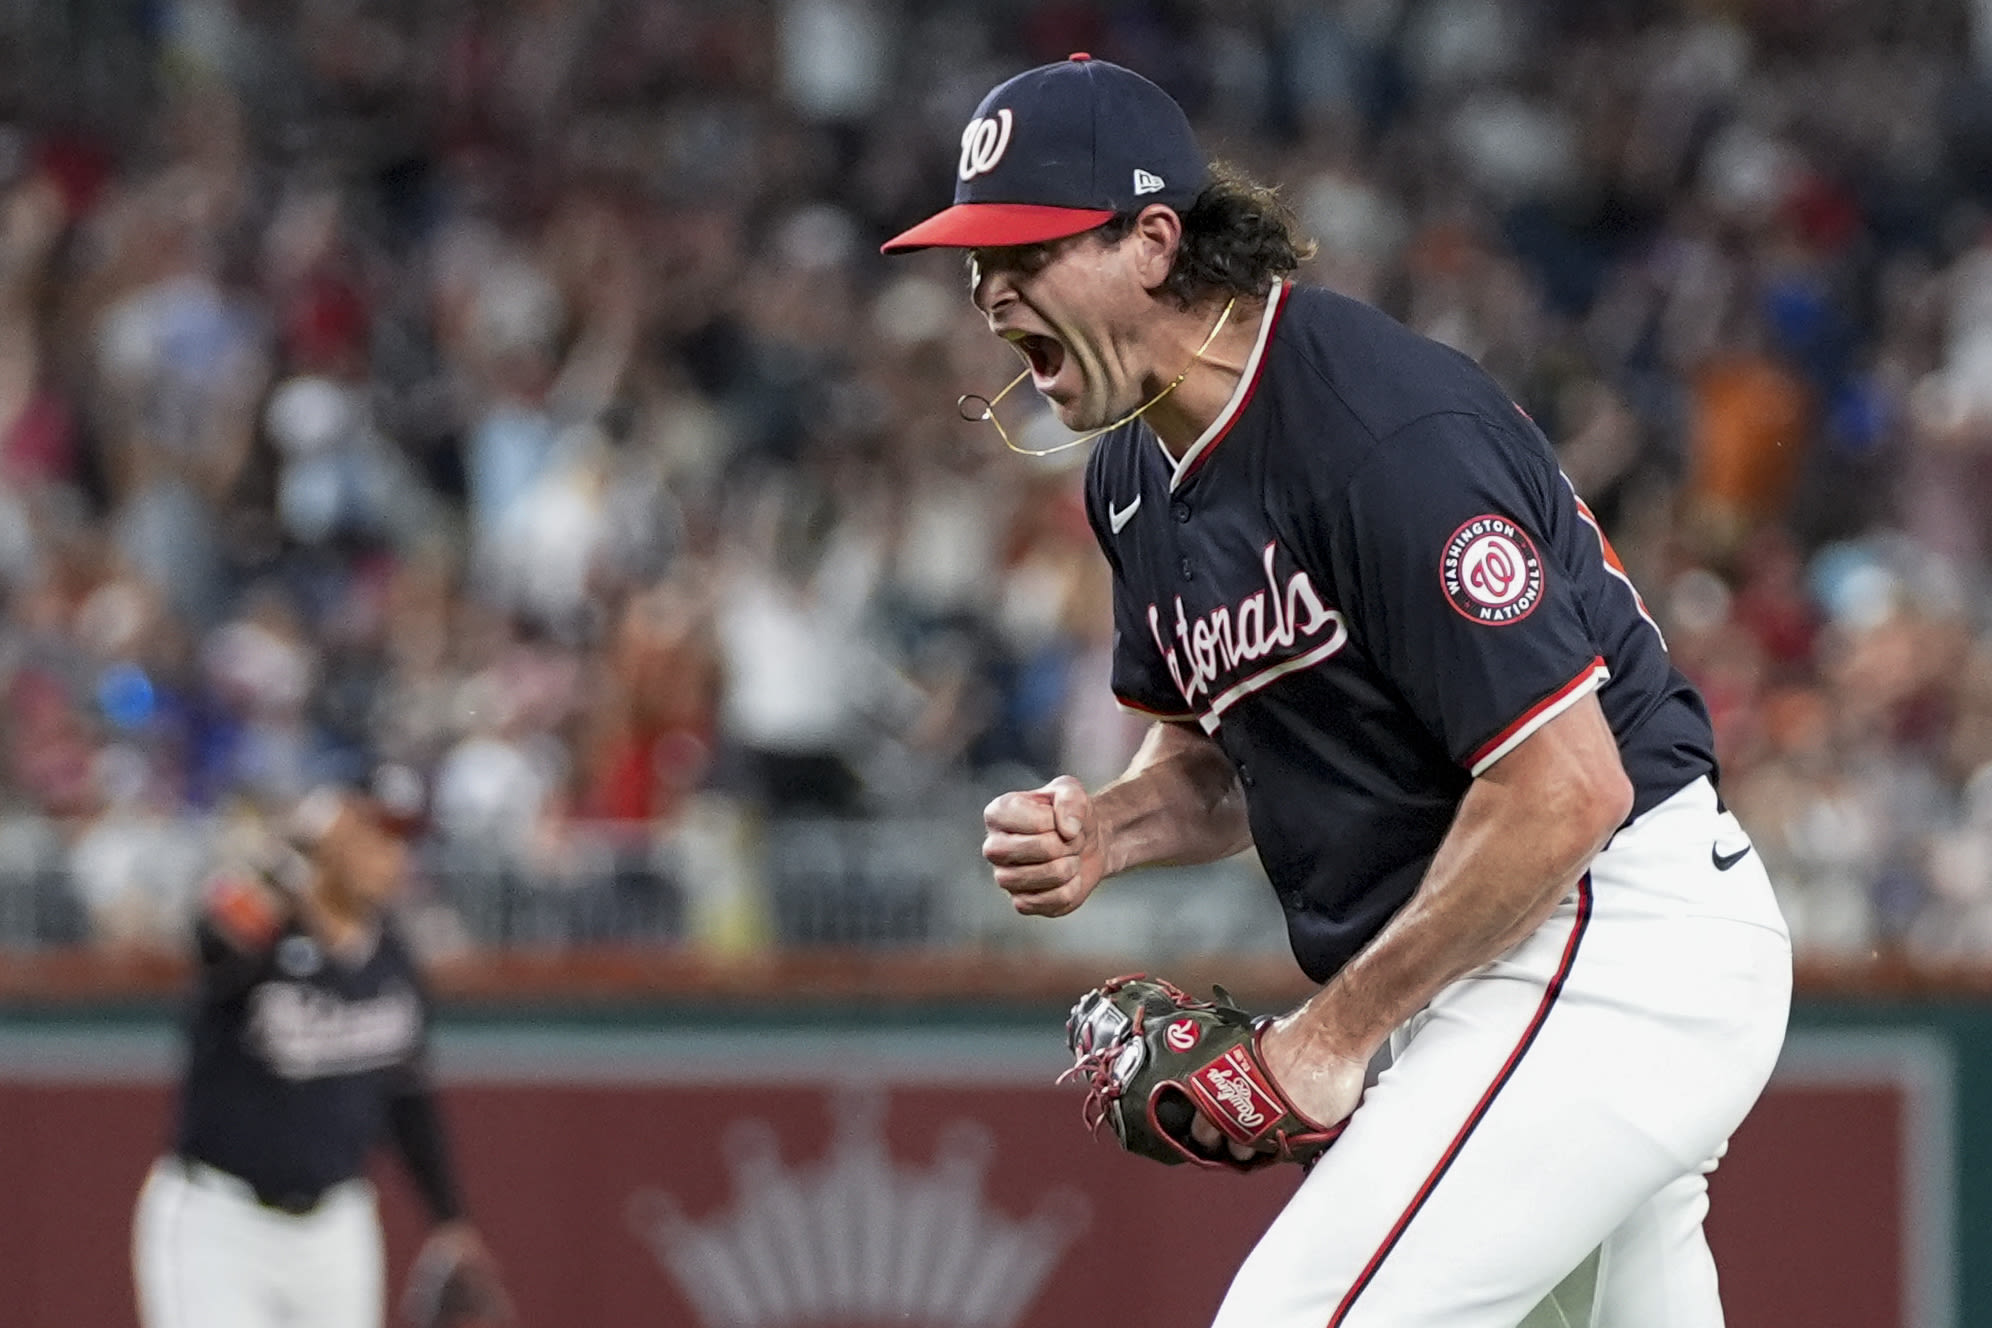 Nationals closer Finnegan becomes the ninth All-Star replacement and the 39th first-time selection